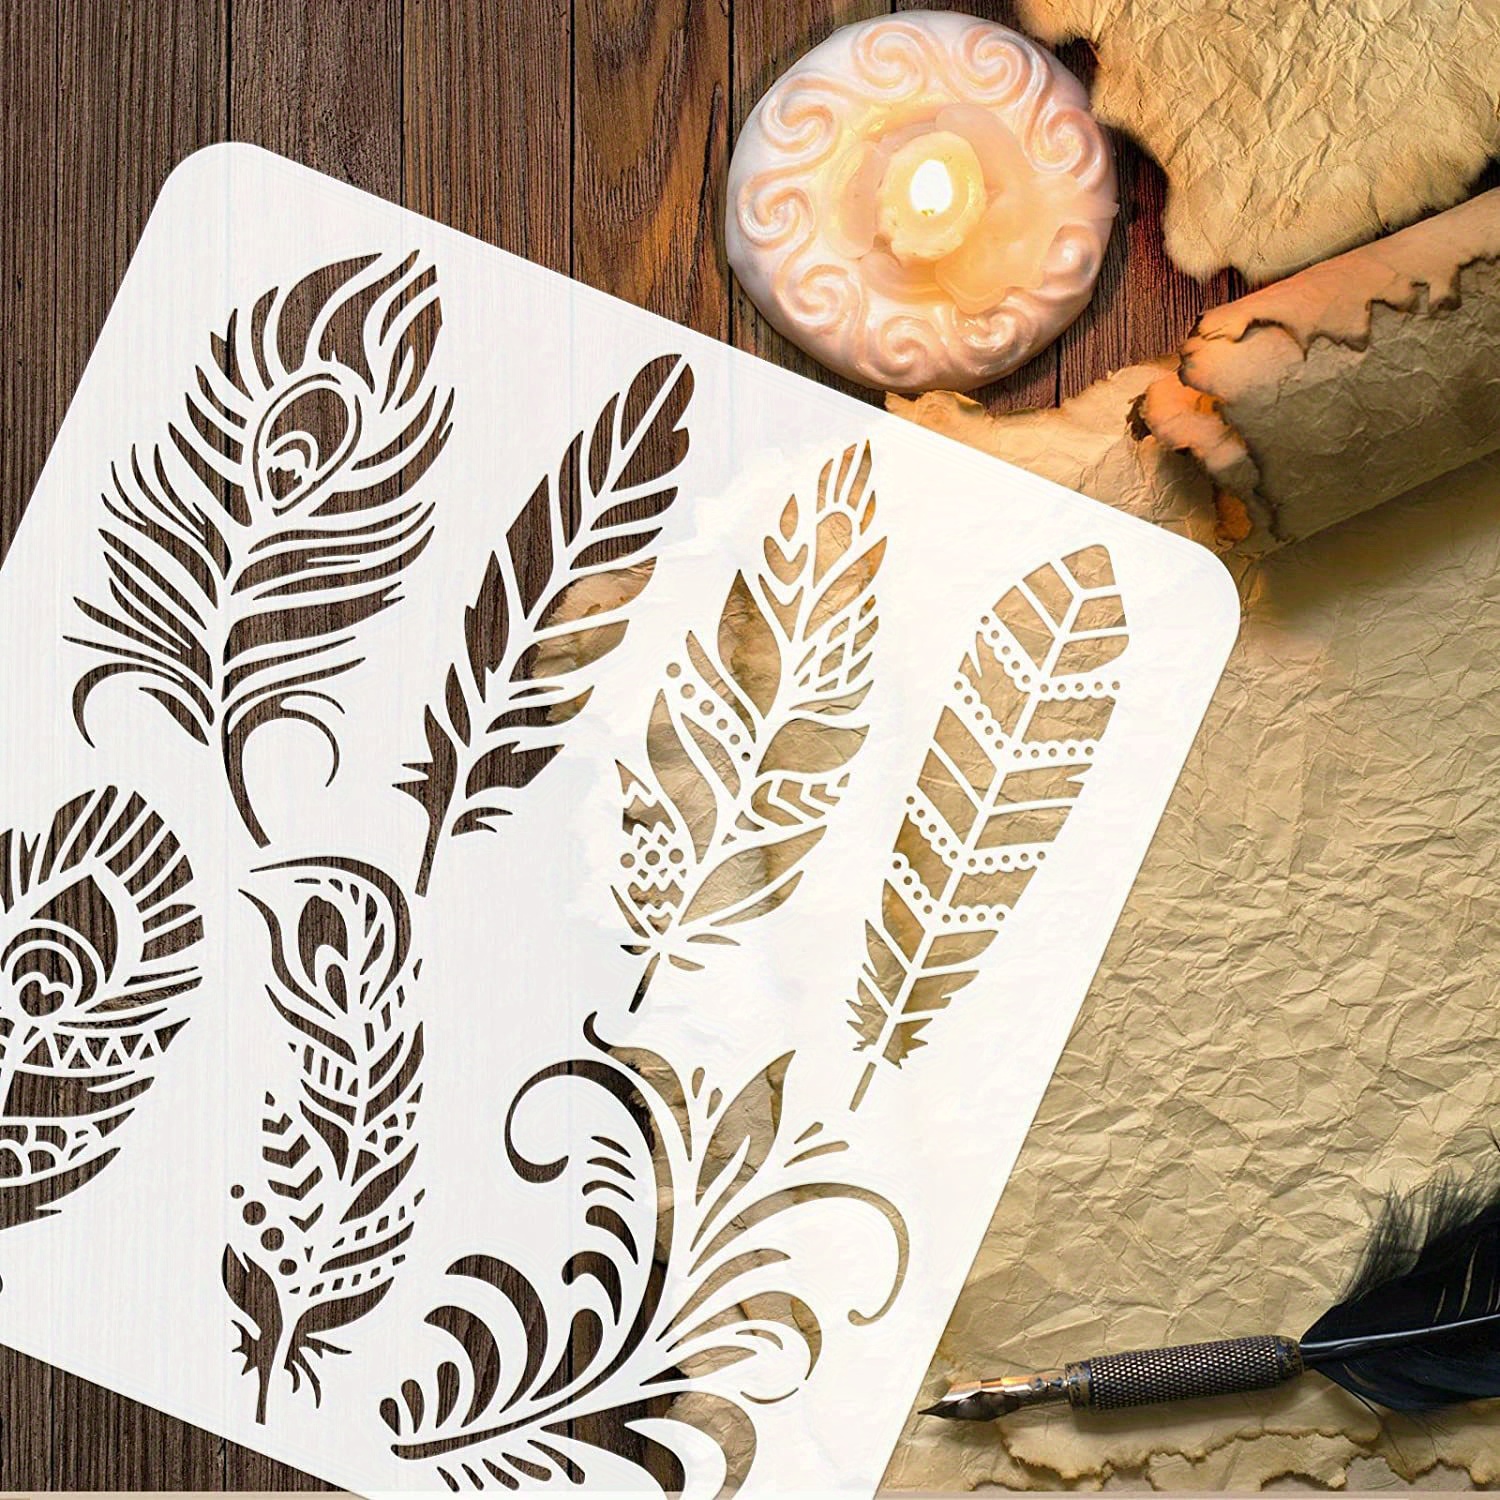 Feather Stencils for Painting 11.8x11.8inch Beautiful Feather Stencil Flying Bird Painting Stencil Bird's Feather Stencils for Painting on Wood Canvas